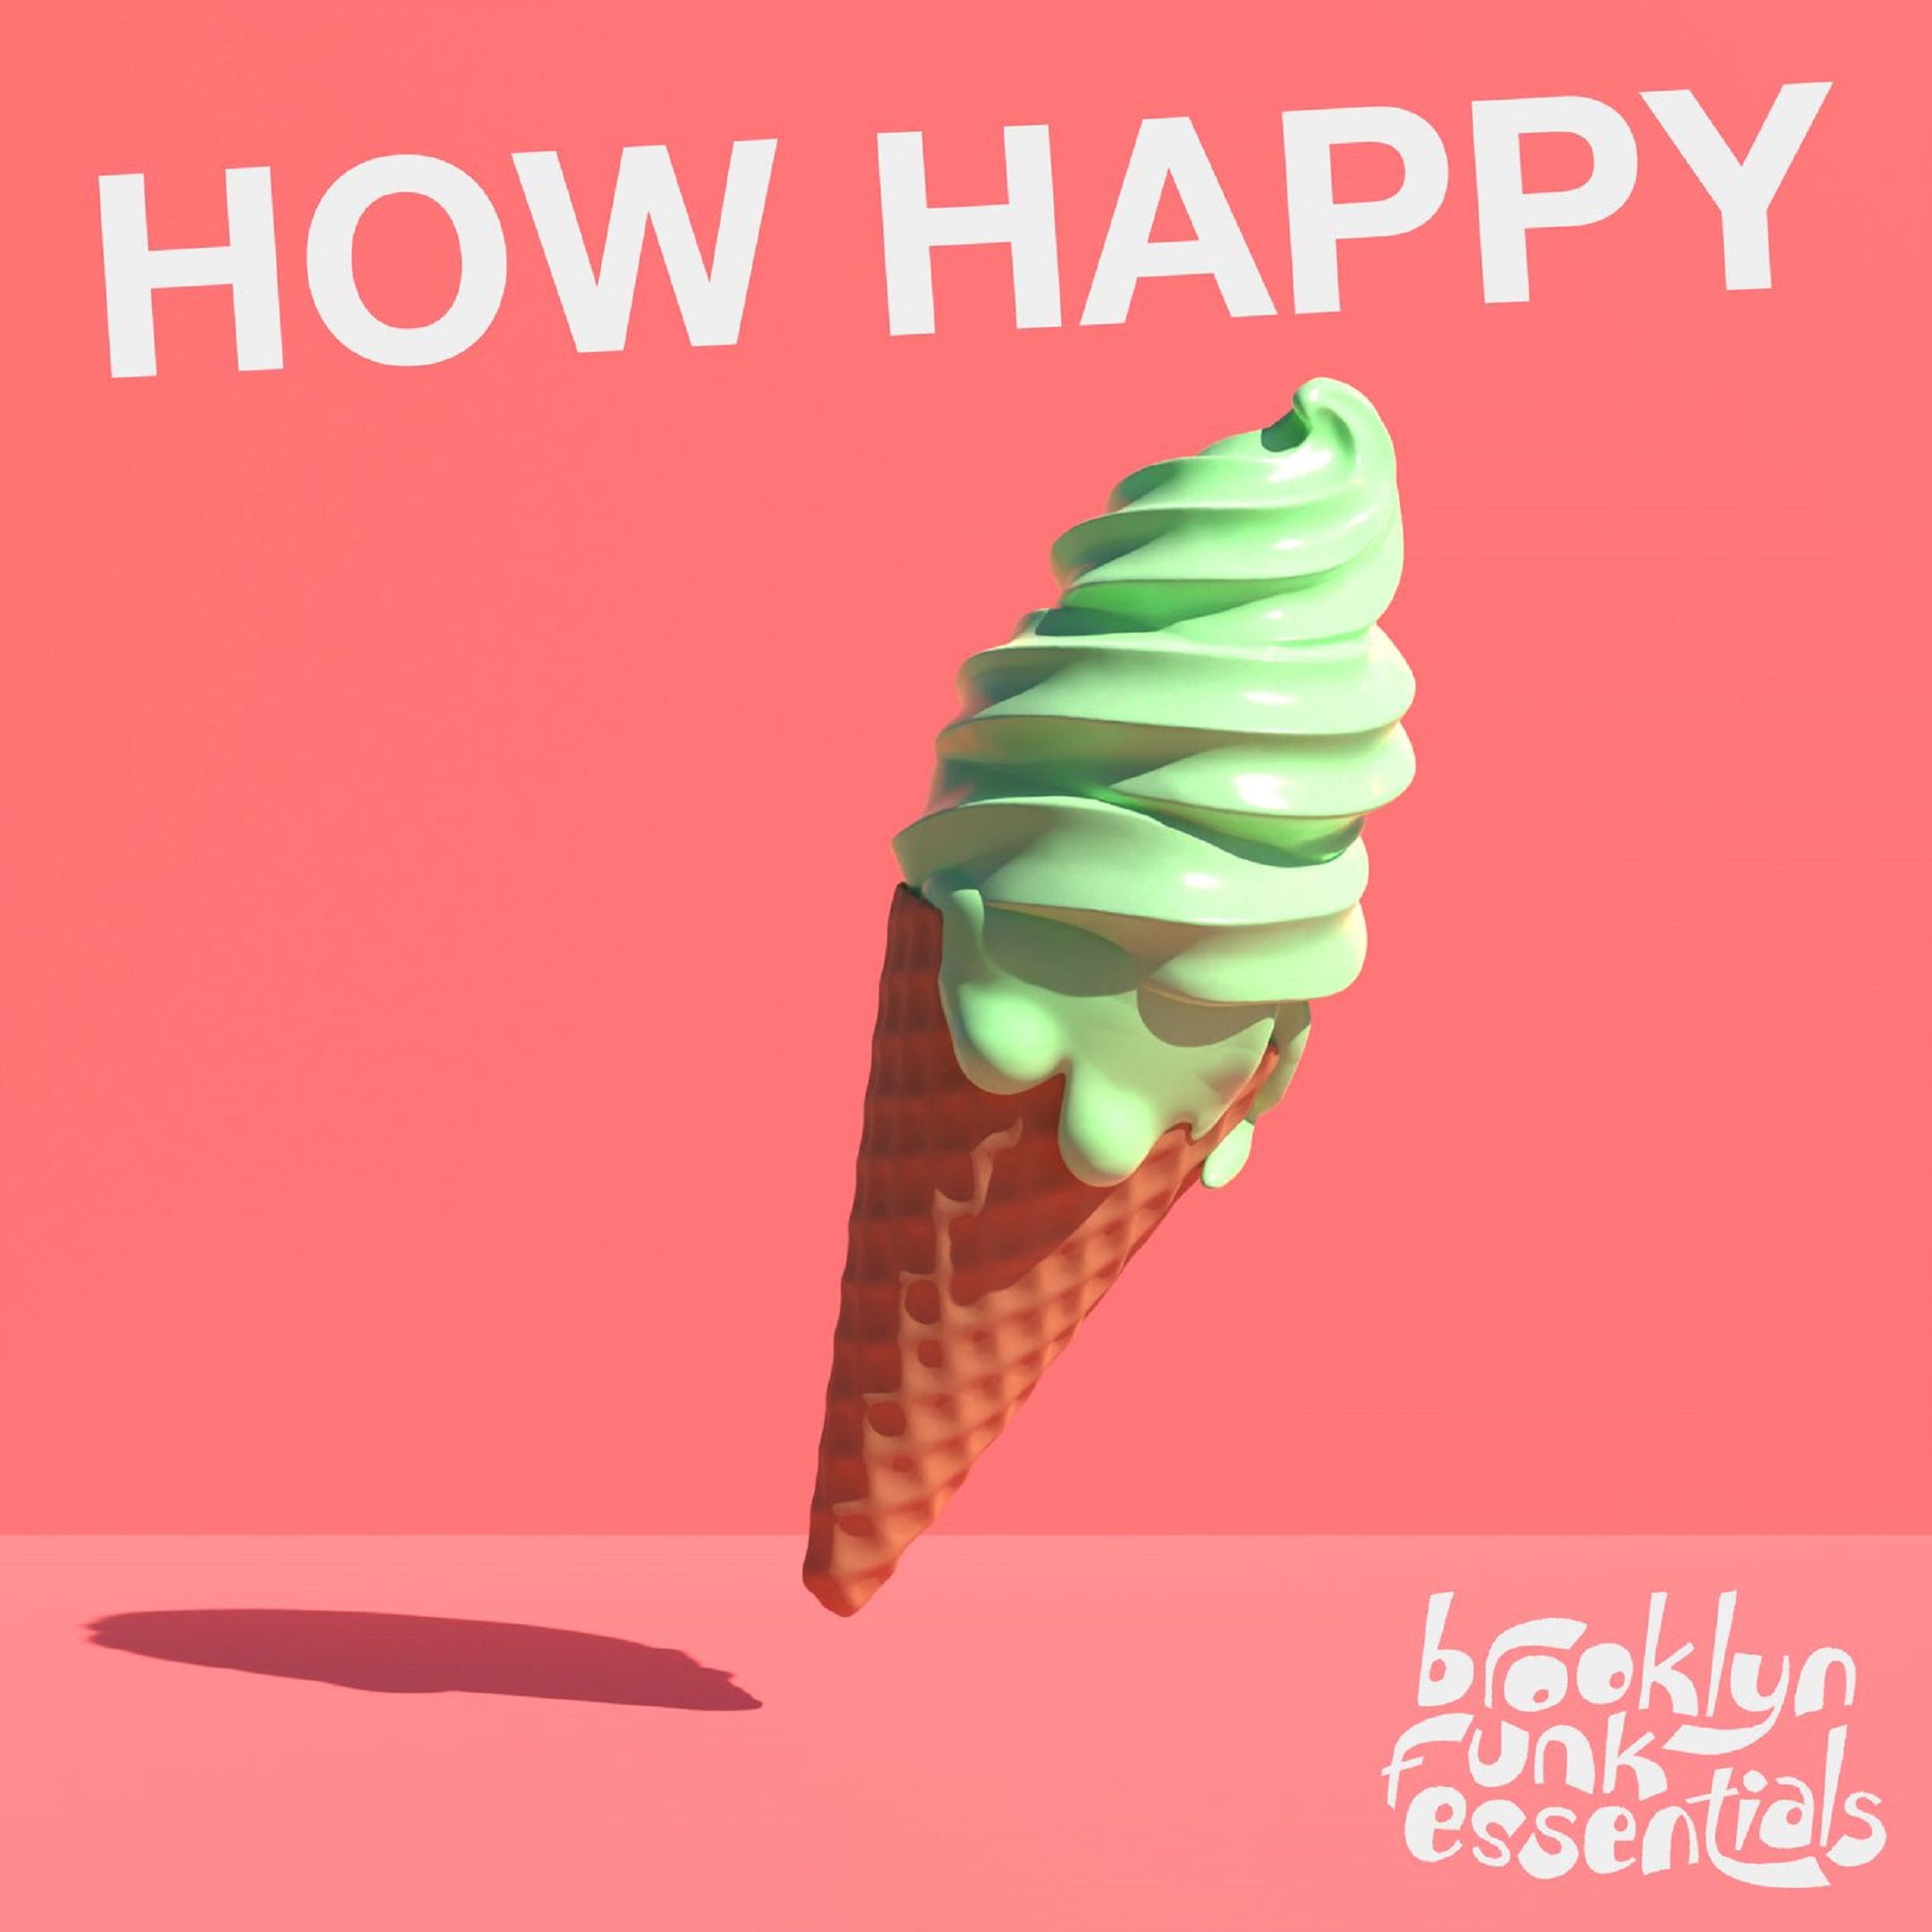 BROOKLYN FUNK ESSENTIALS ‘How Happy’ New single & video out today